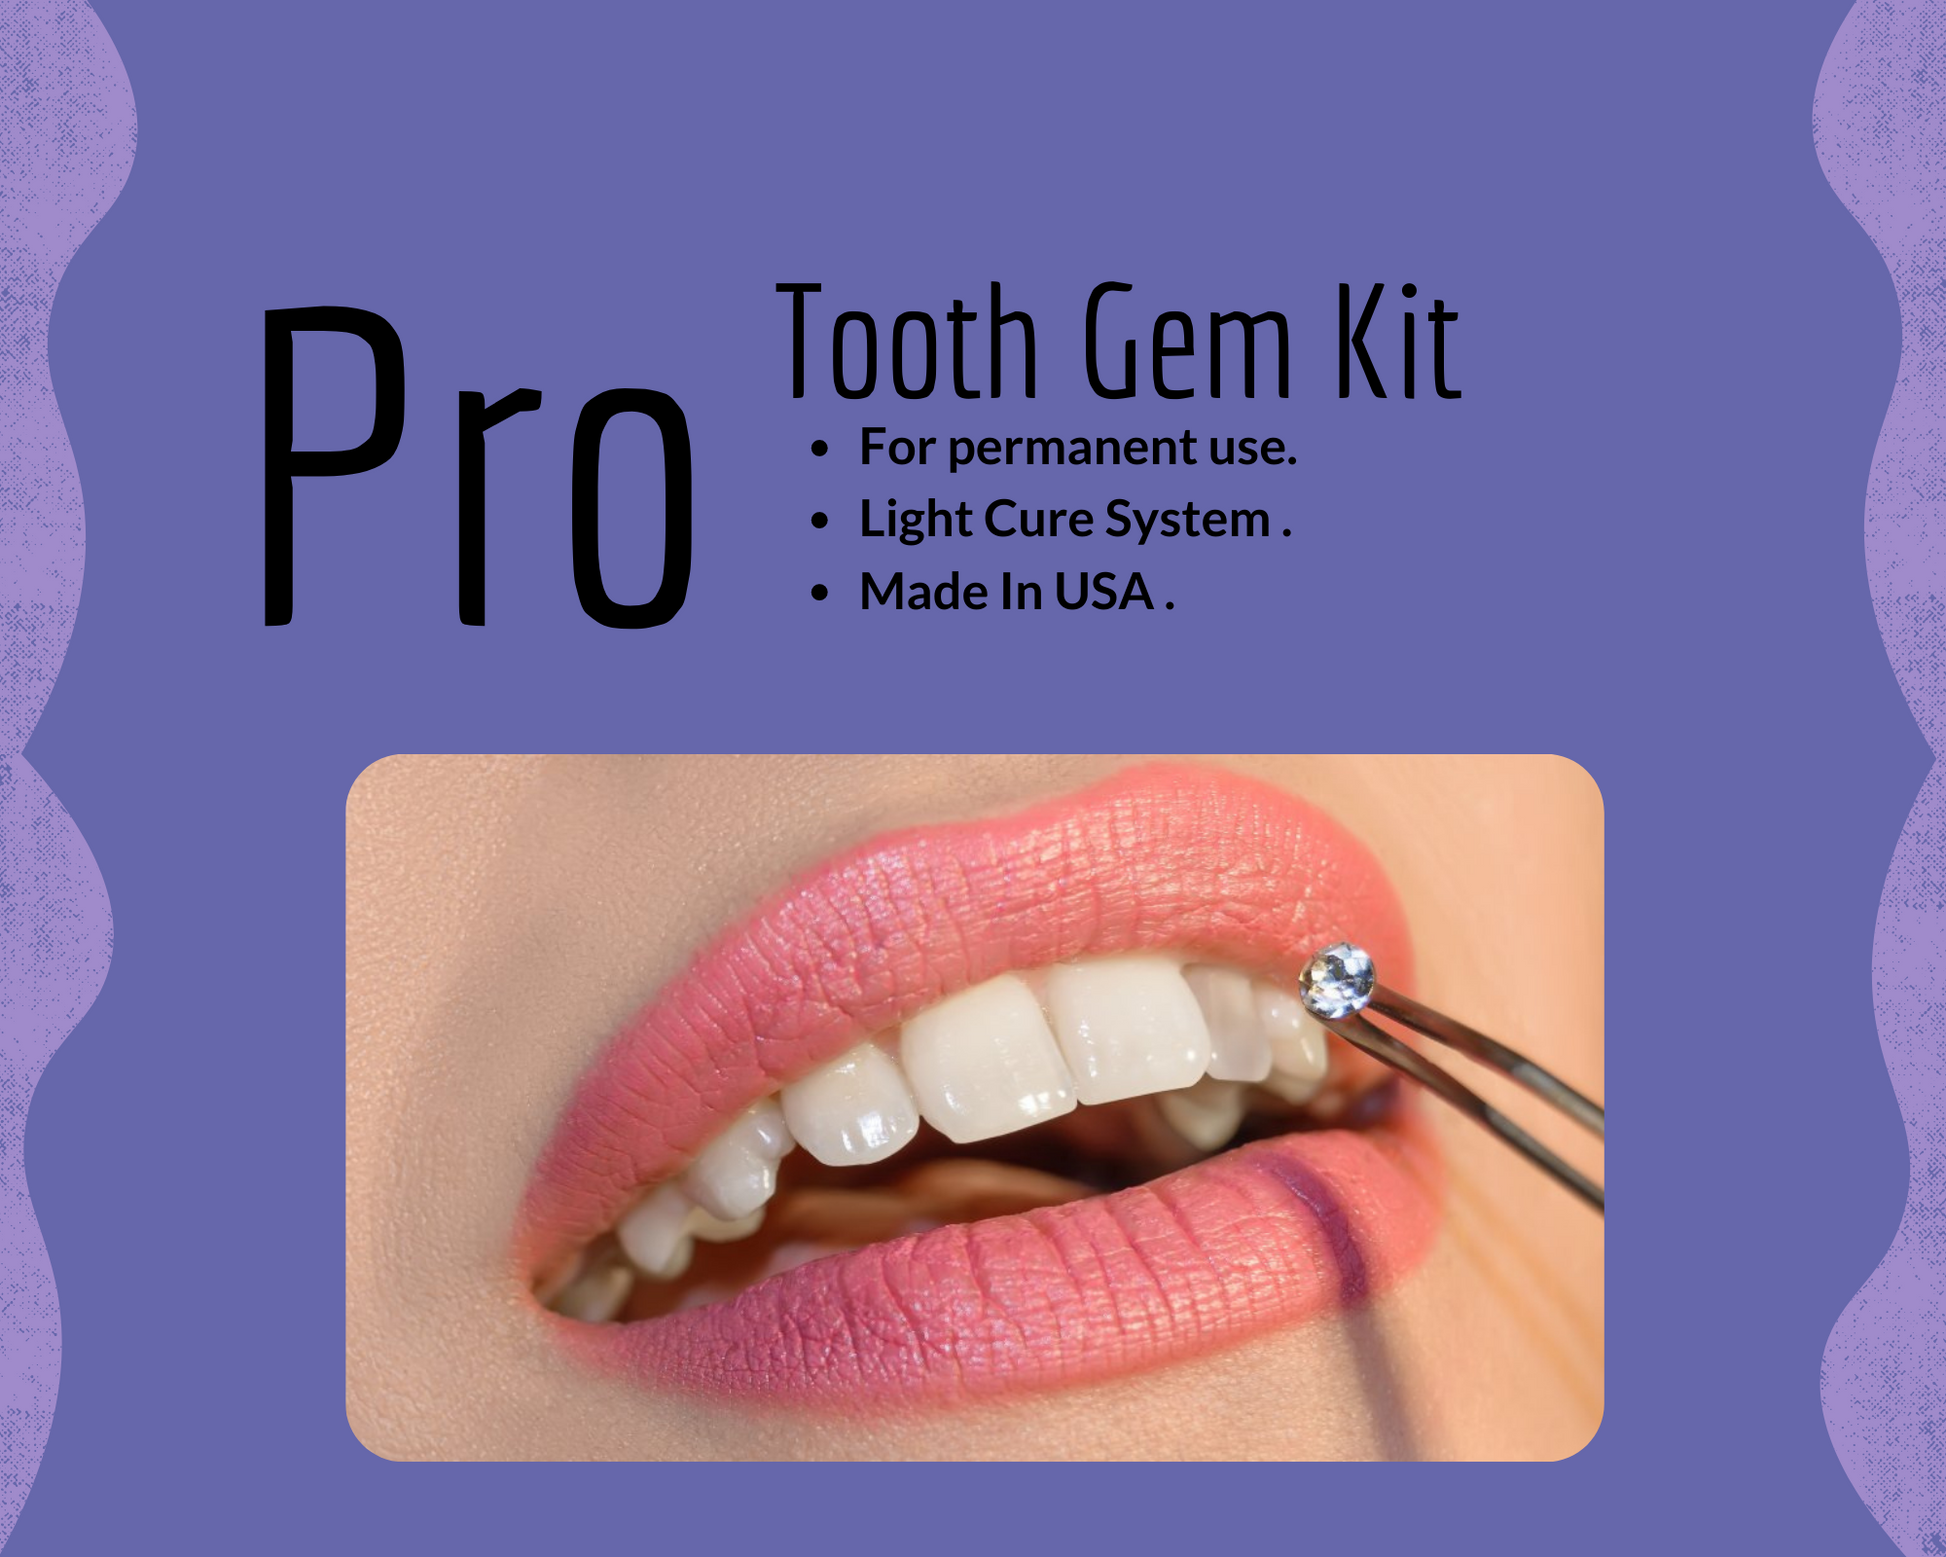 Tooth Gem Adhesive kit - Bundle Set with Extra Items for Permanent